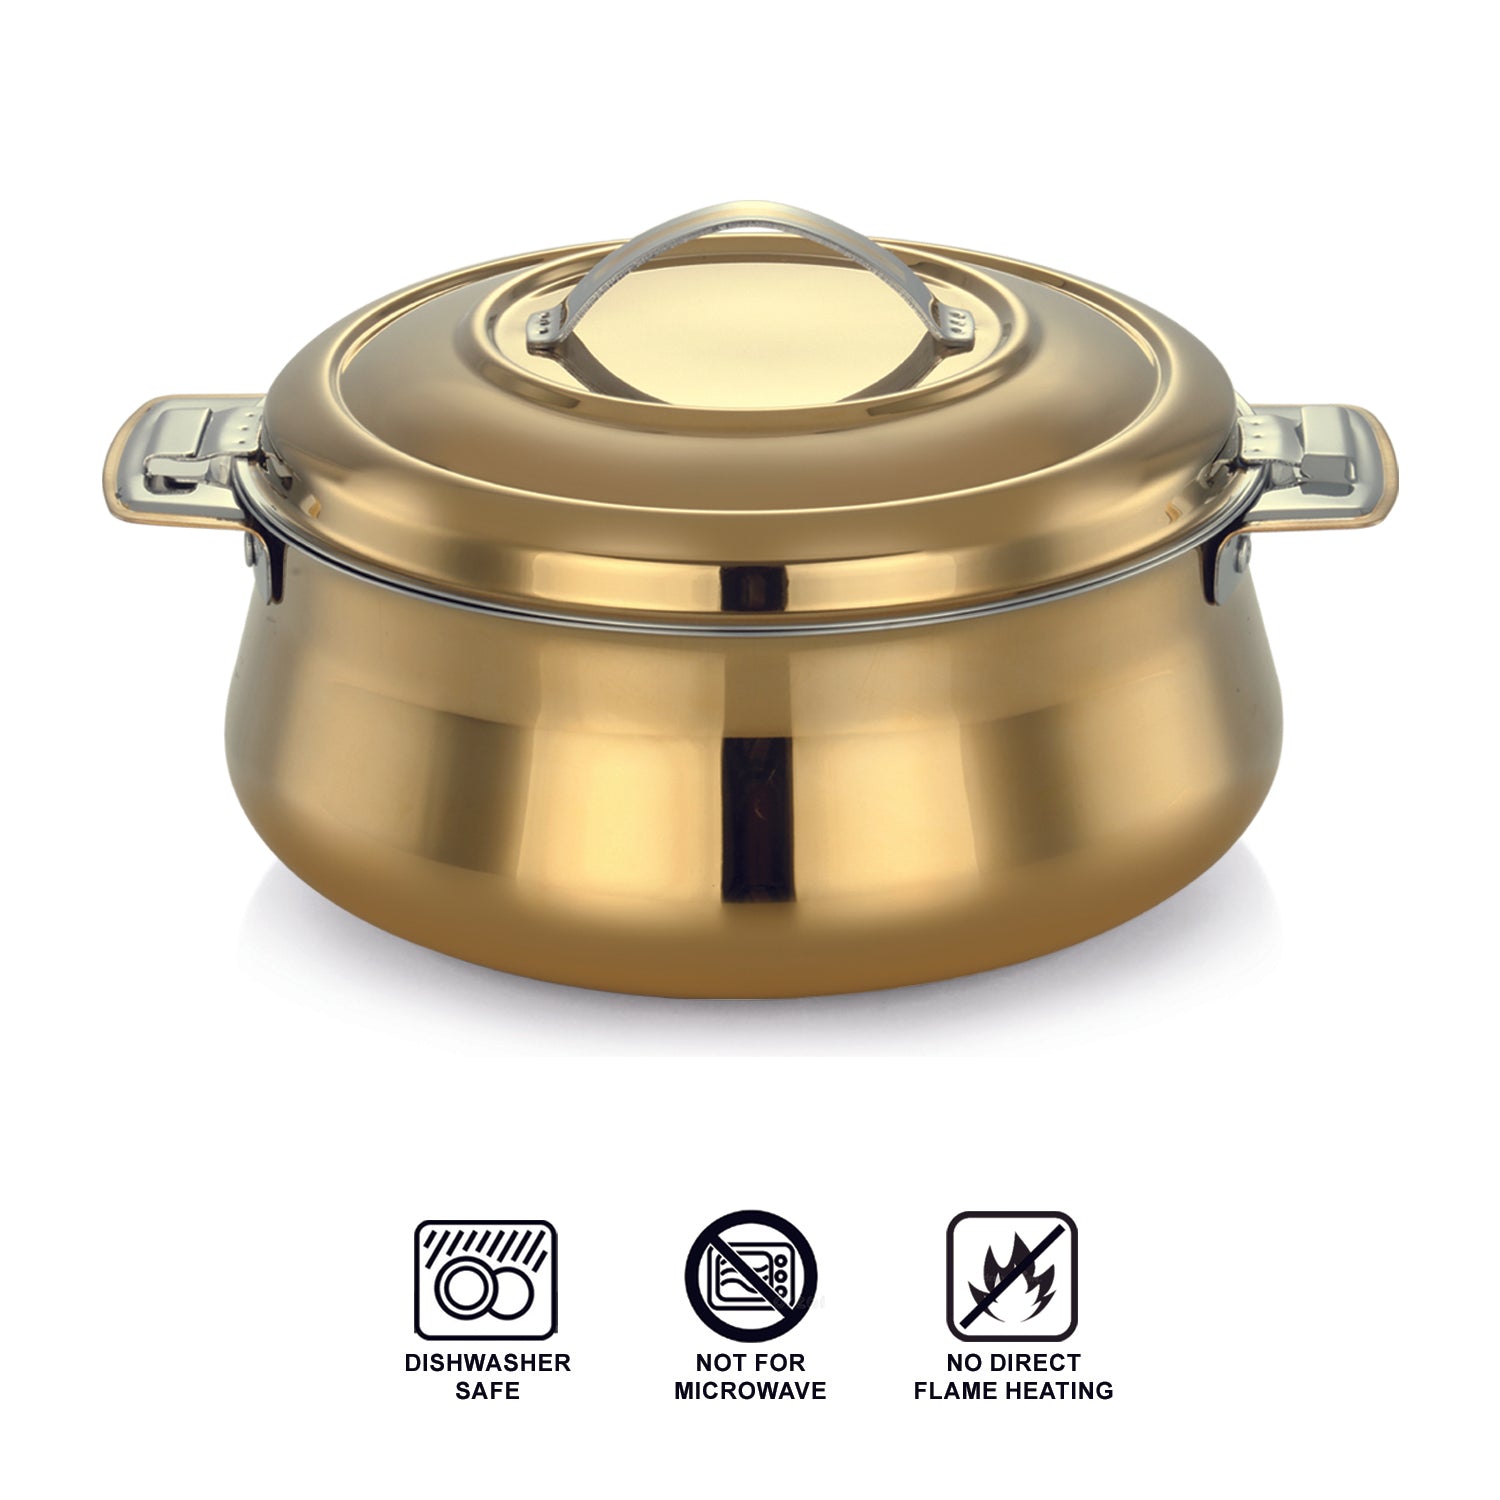 AVIAS Riara Gold Premium Stainless steel casserole compatibility